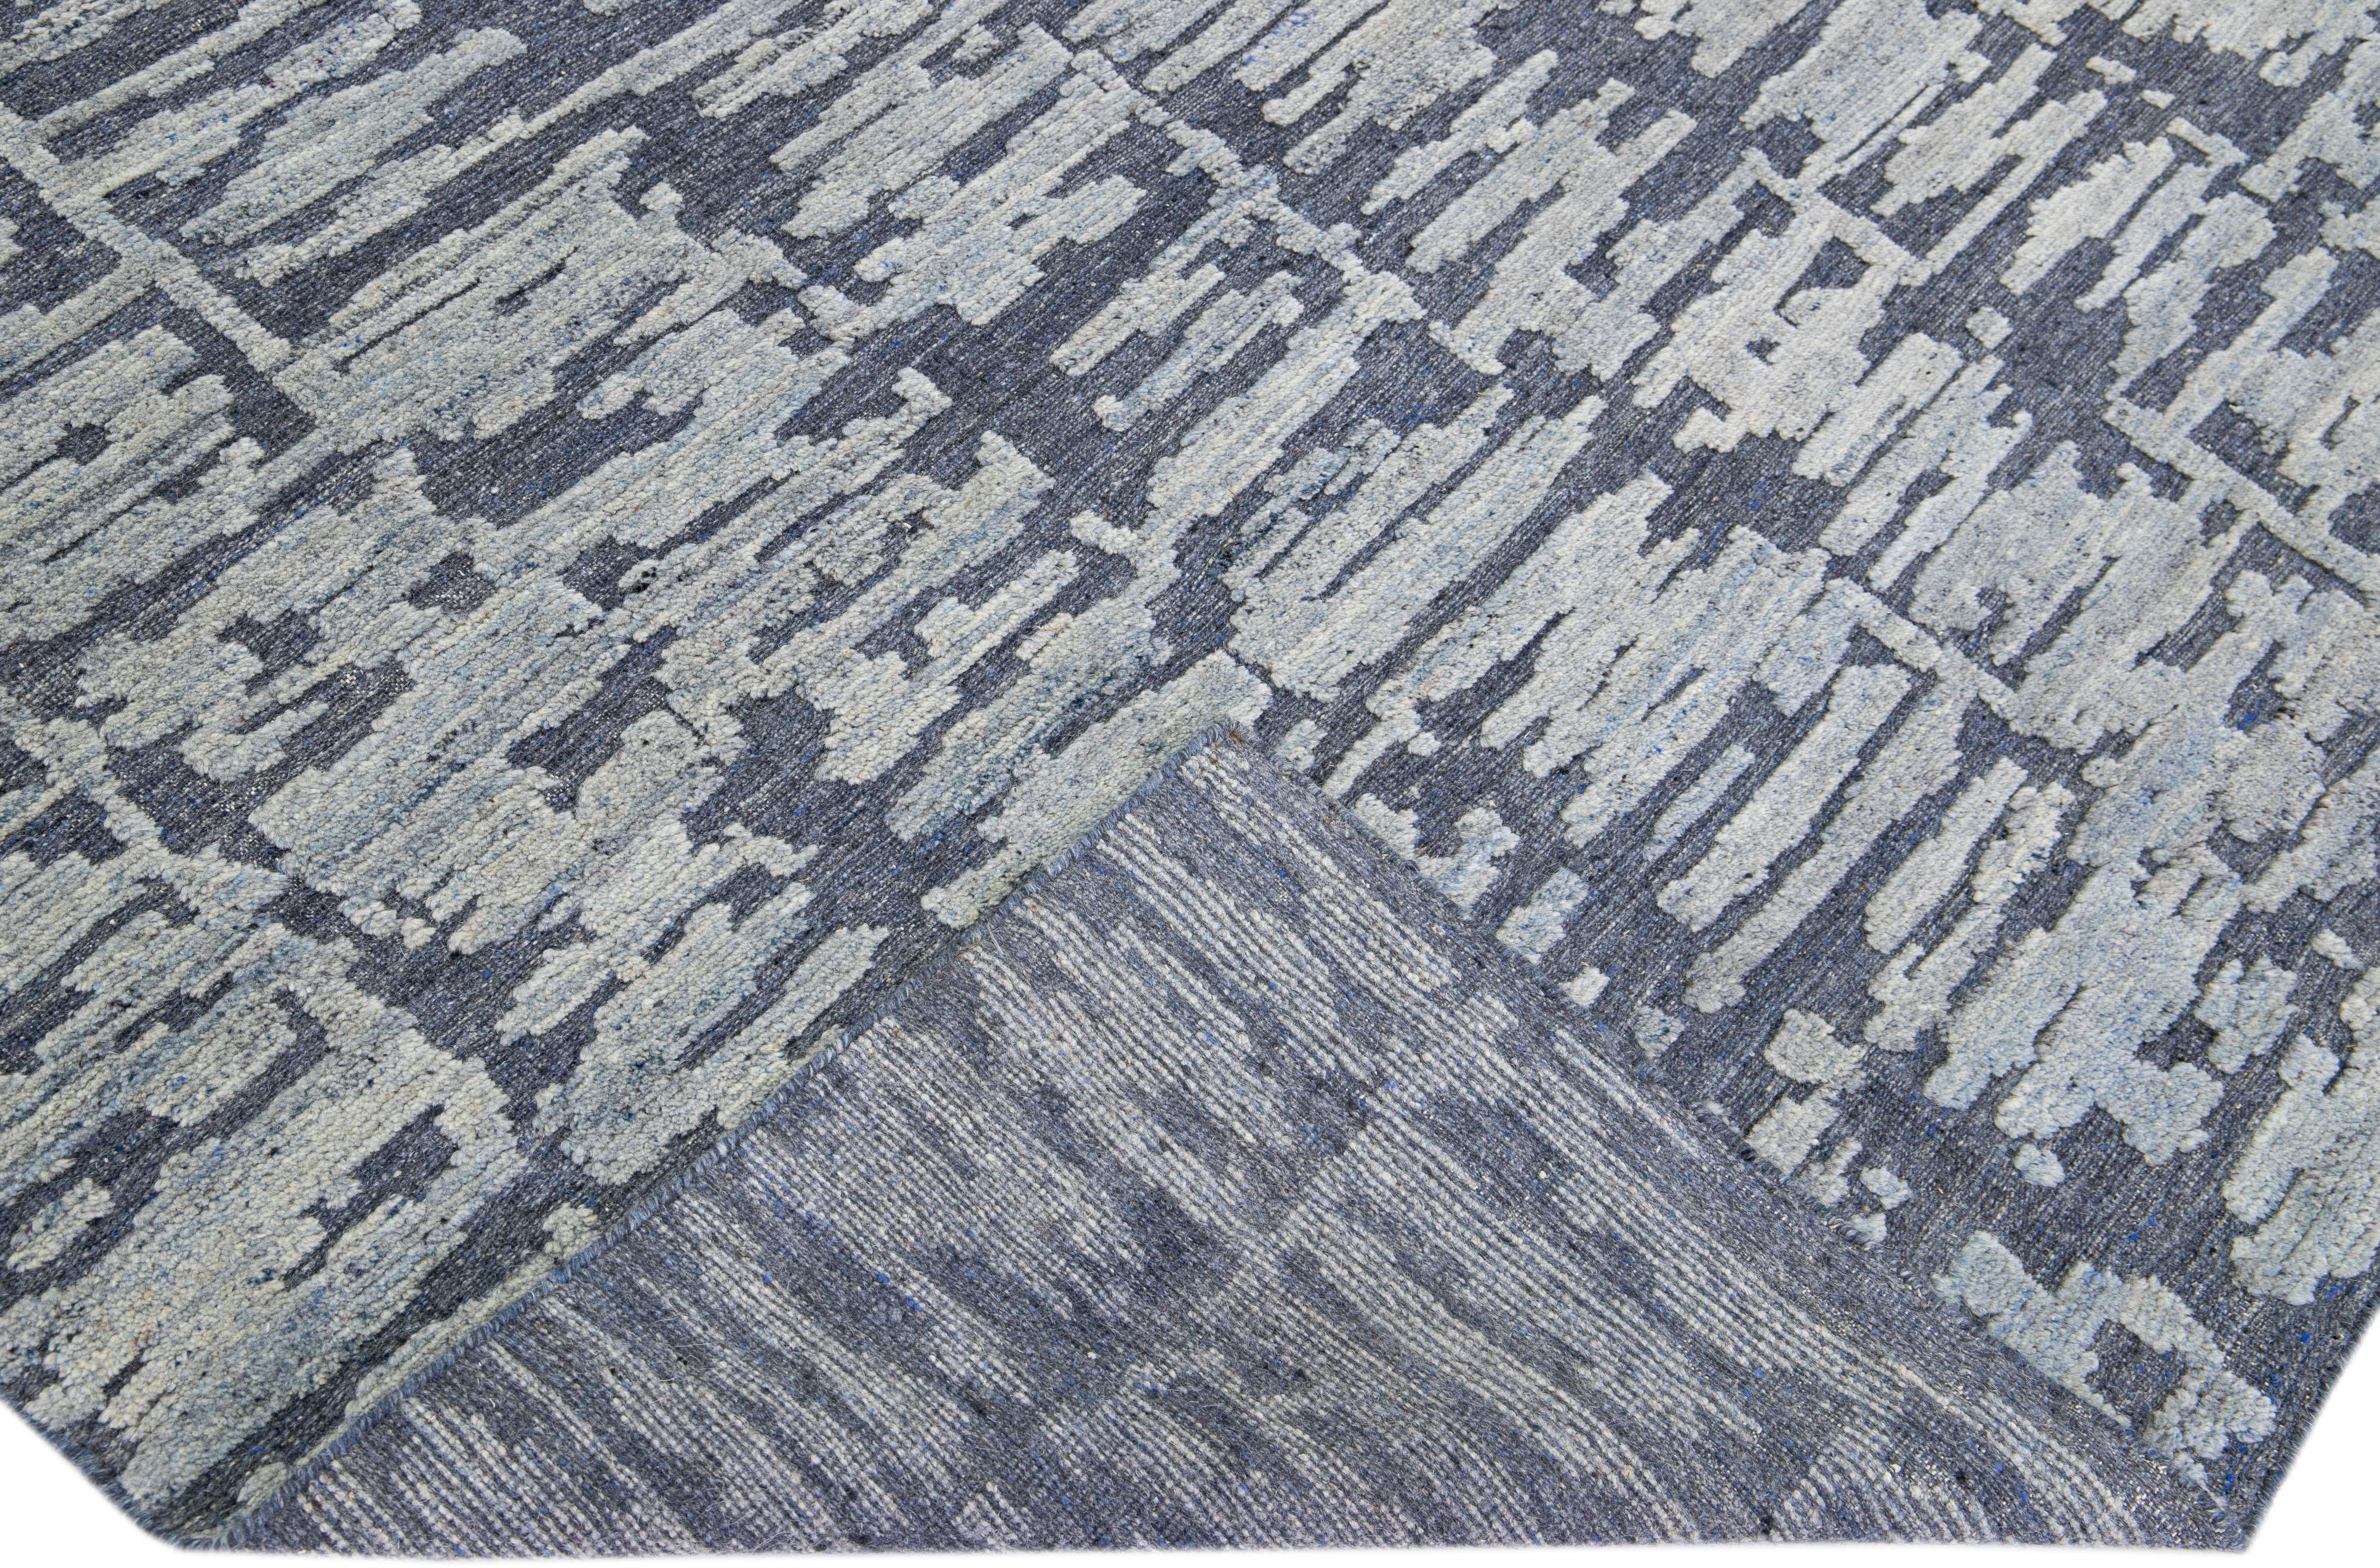 Beautiful Contemporary Thom Filicia Home Collection Rugs. This Indian hand-knotted rug is made of wool and has a blue color field and light gray accents all over the design. 
Thom Filicia´s eye for exquisite detailing and beautiful texture shines